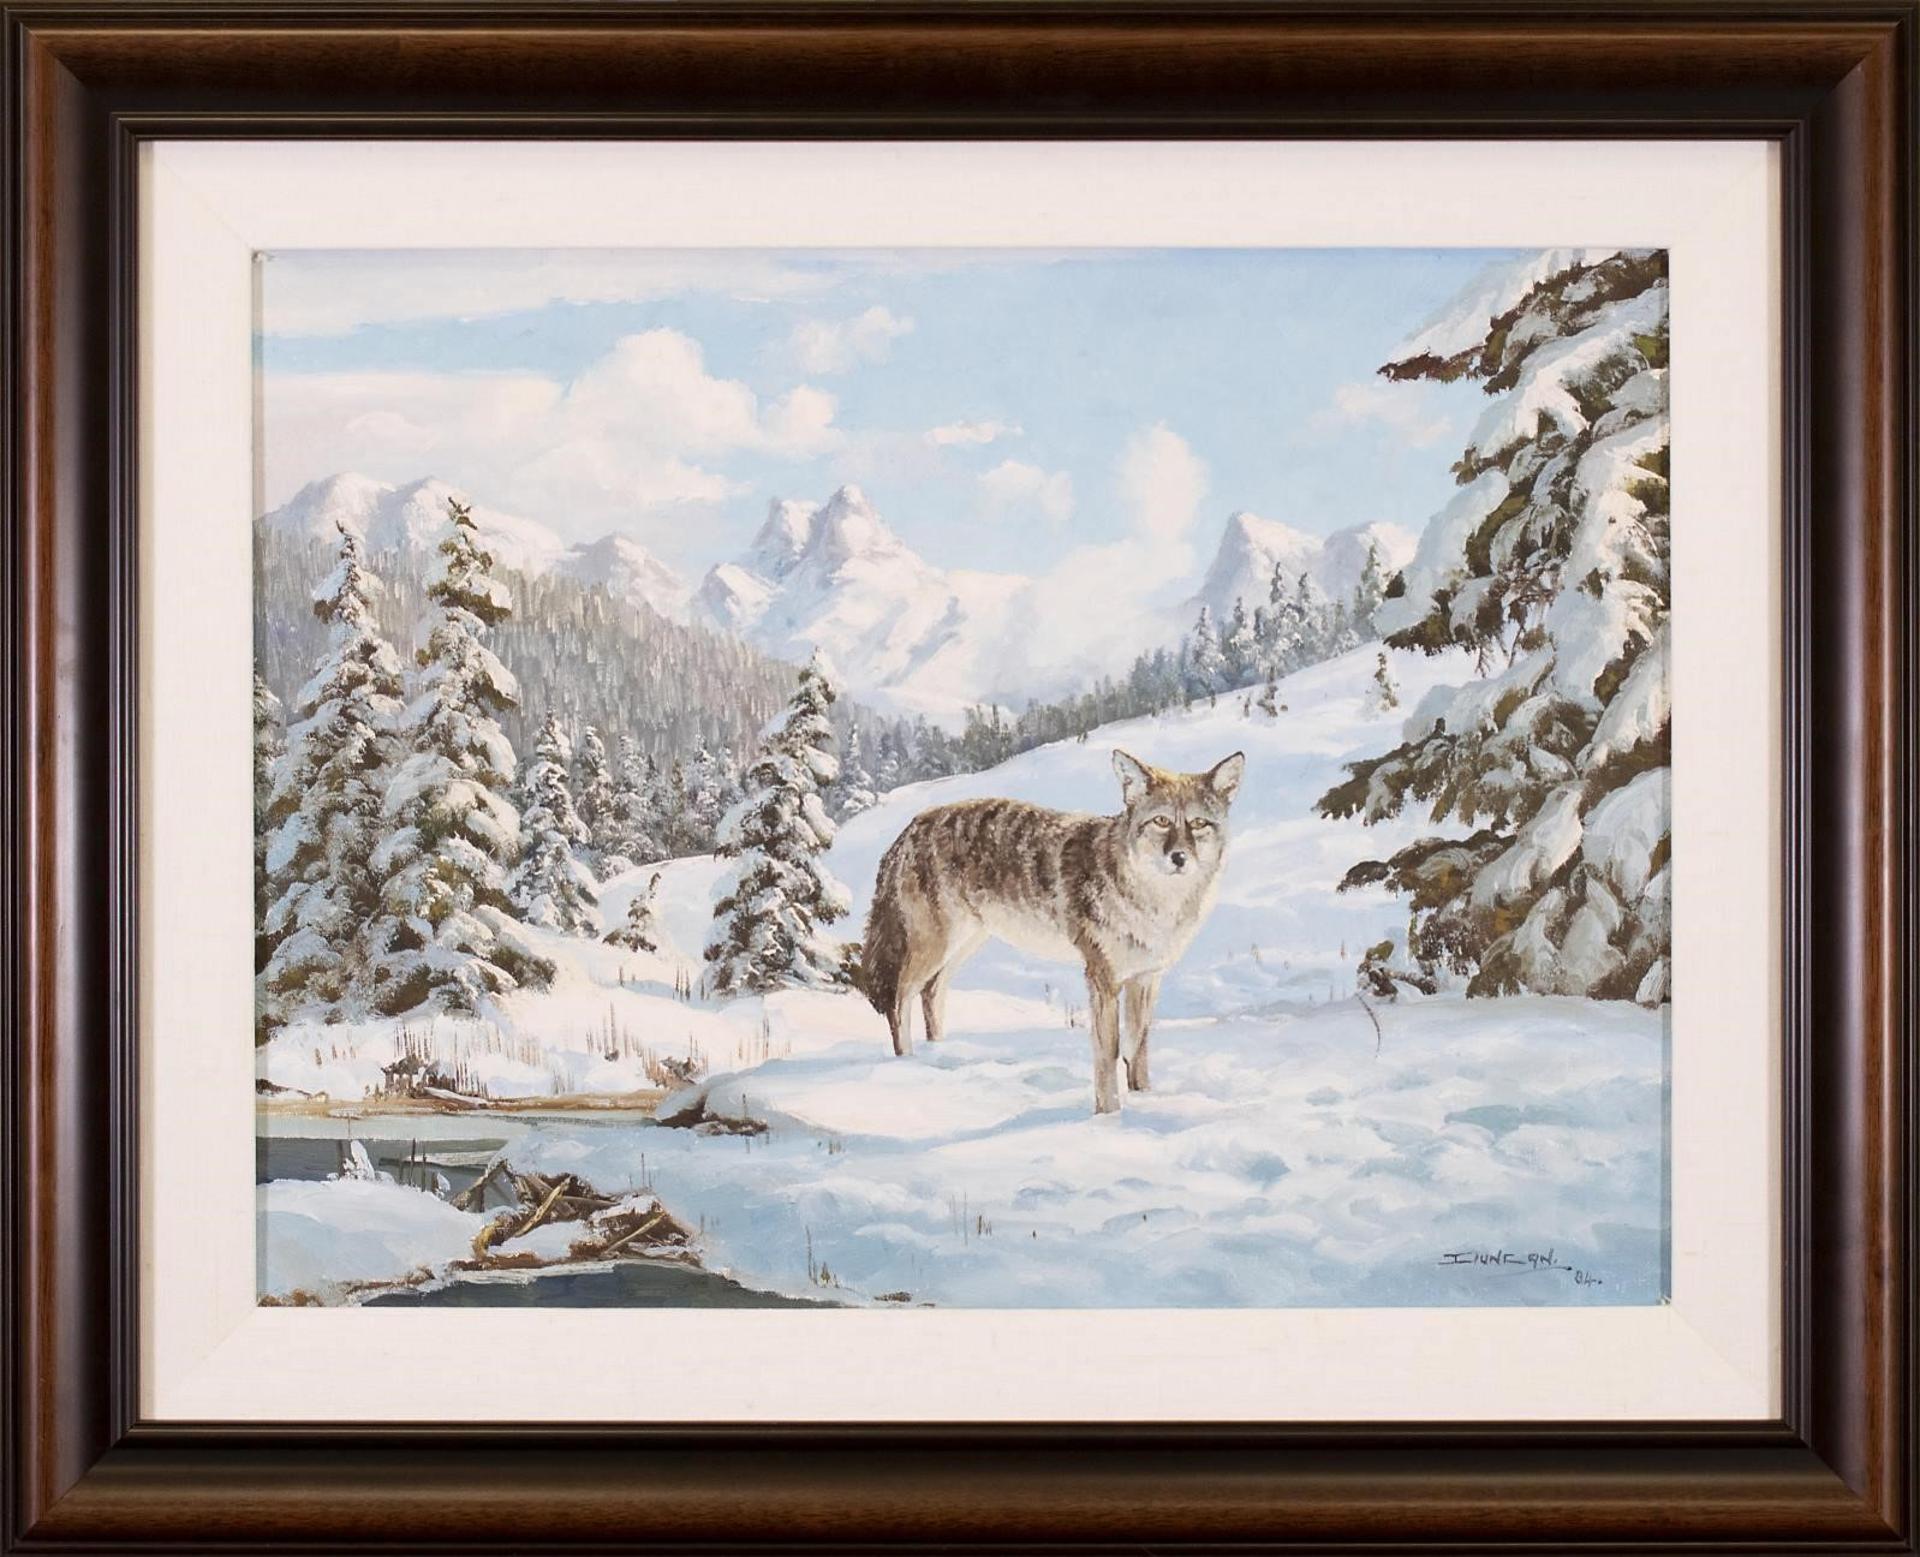 Duncan Mackinnon Crockford (1922-1991) - The Timber Wolf, Scene Lower Spray Valley Nr. Canmore- Alberta; 1984